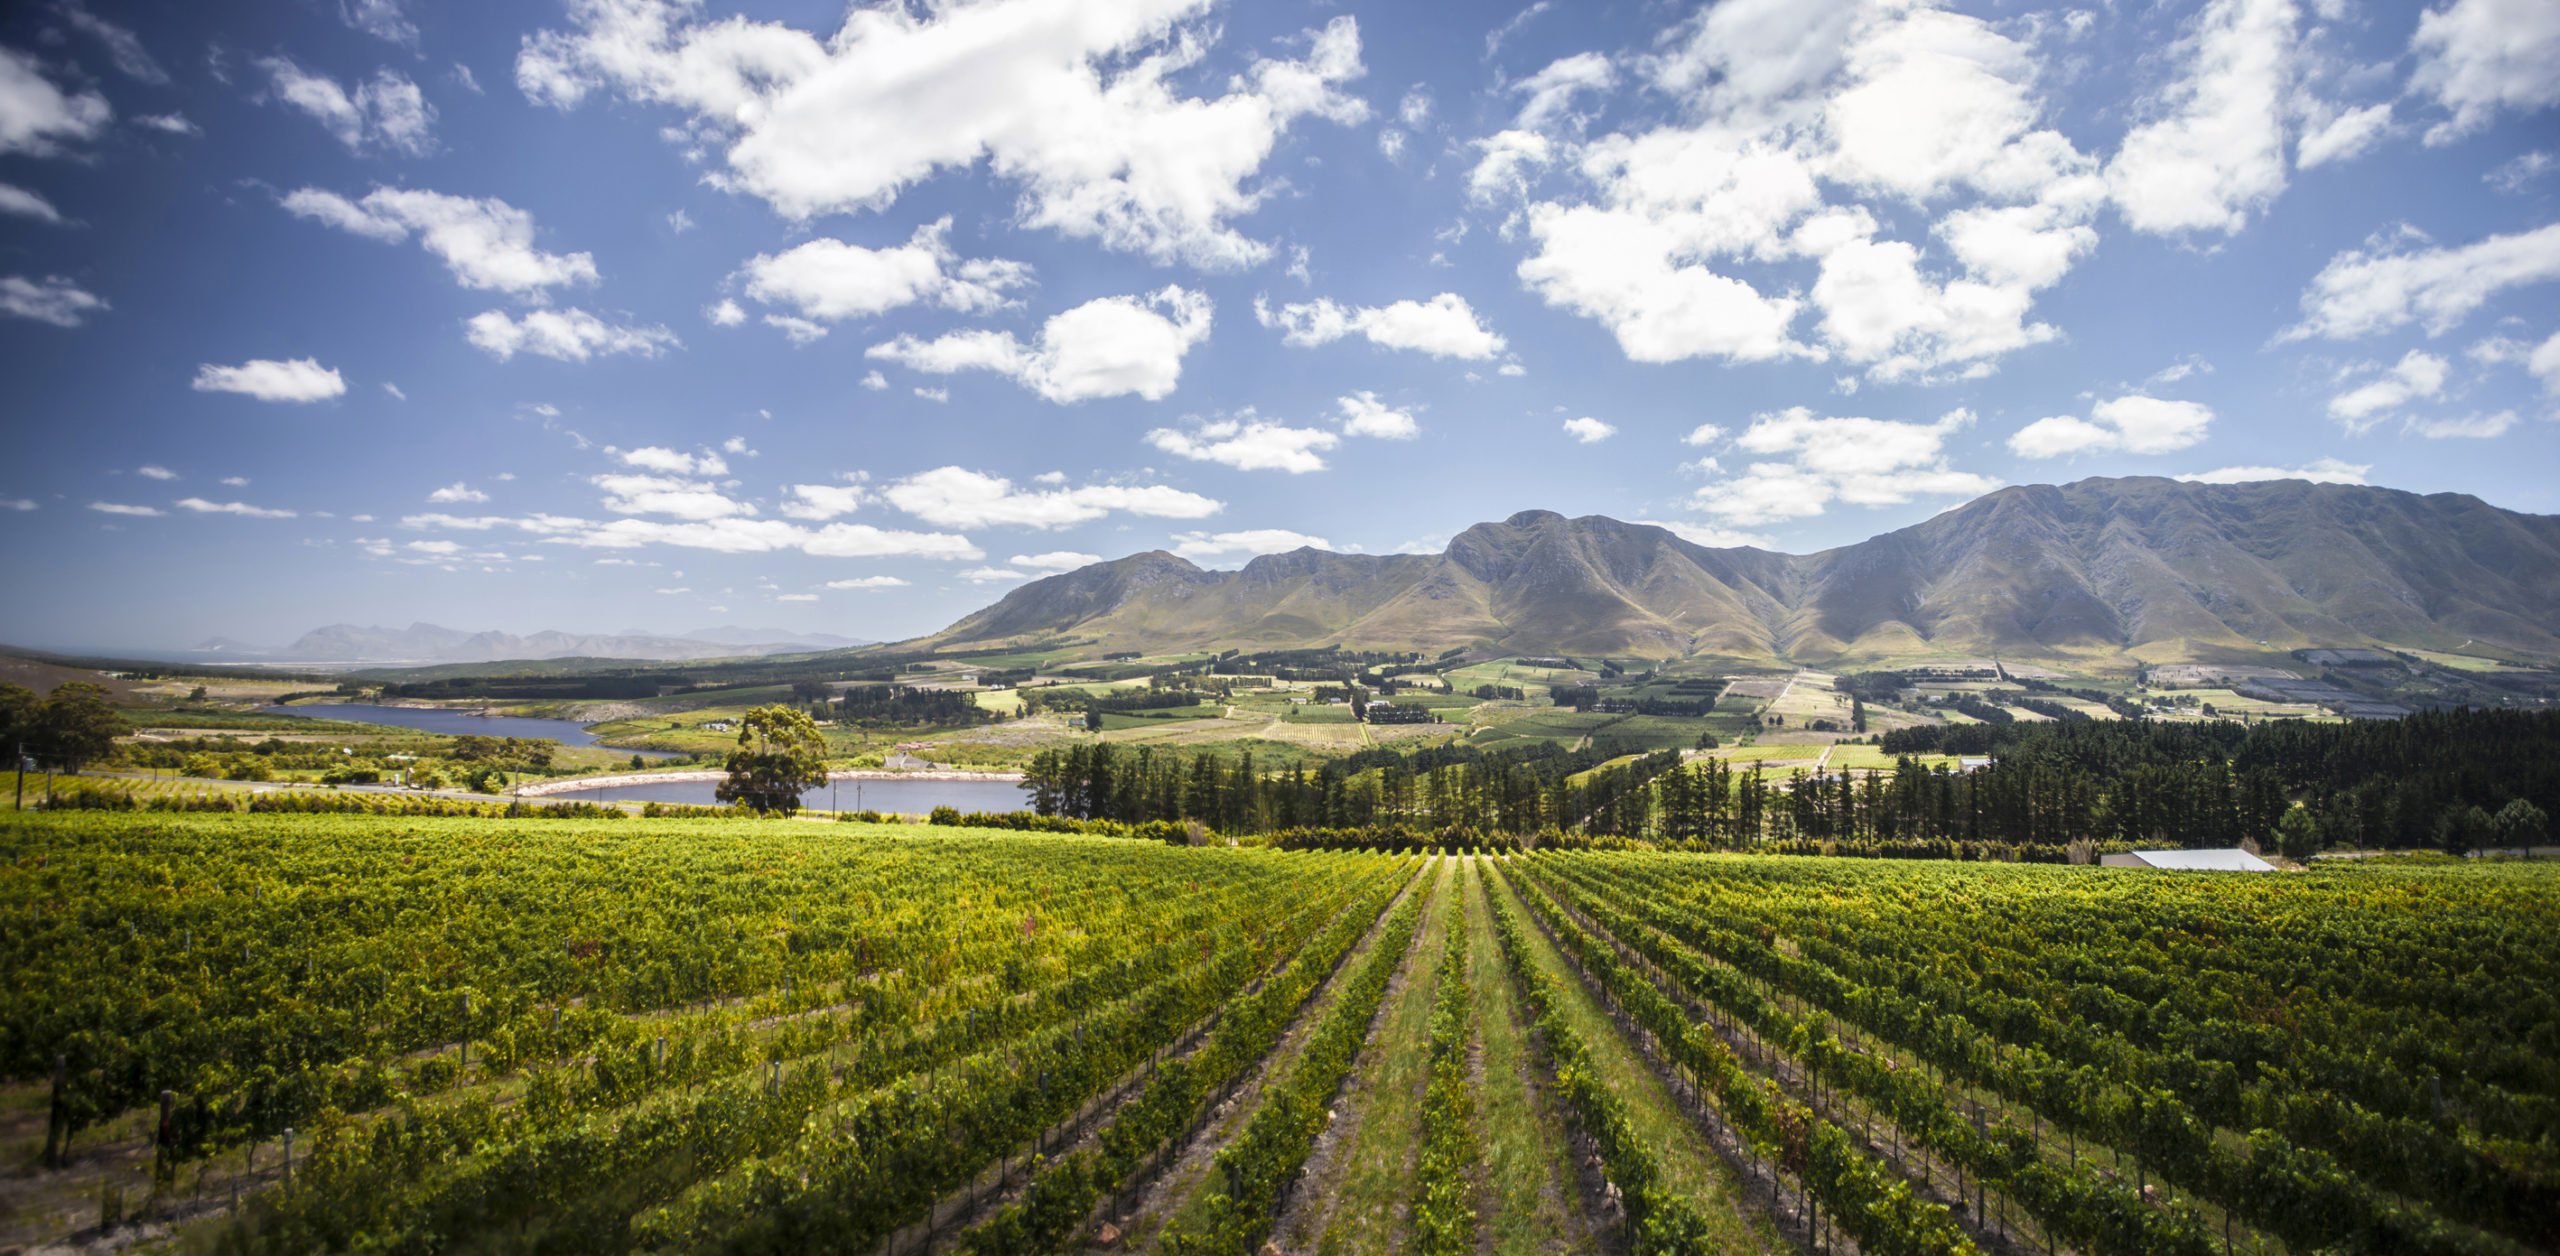 WWF Conservation Champions in Cape Town & the Cape Winelands